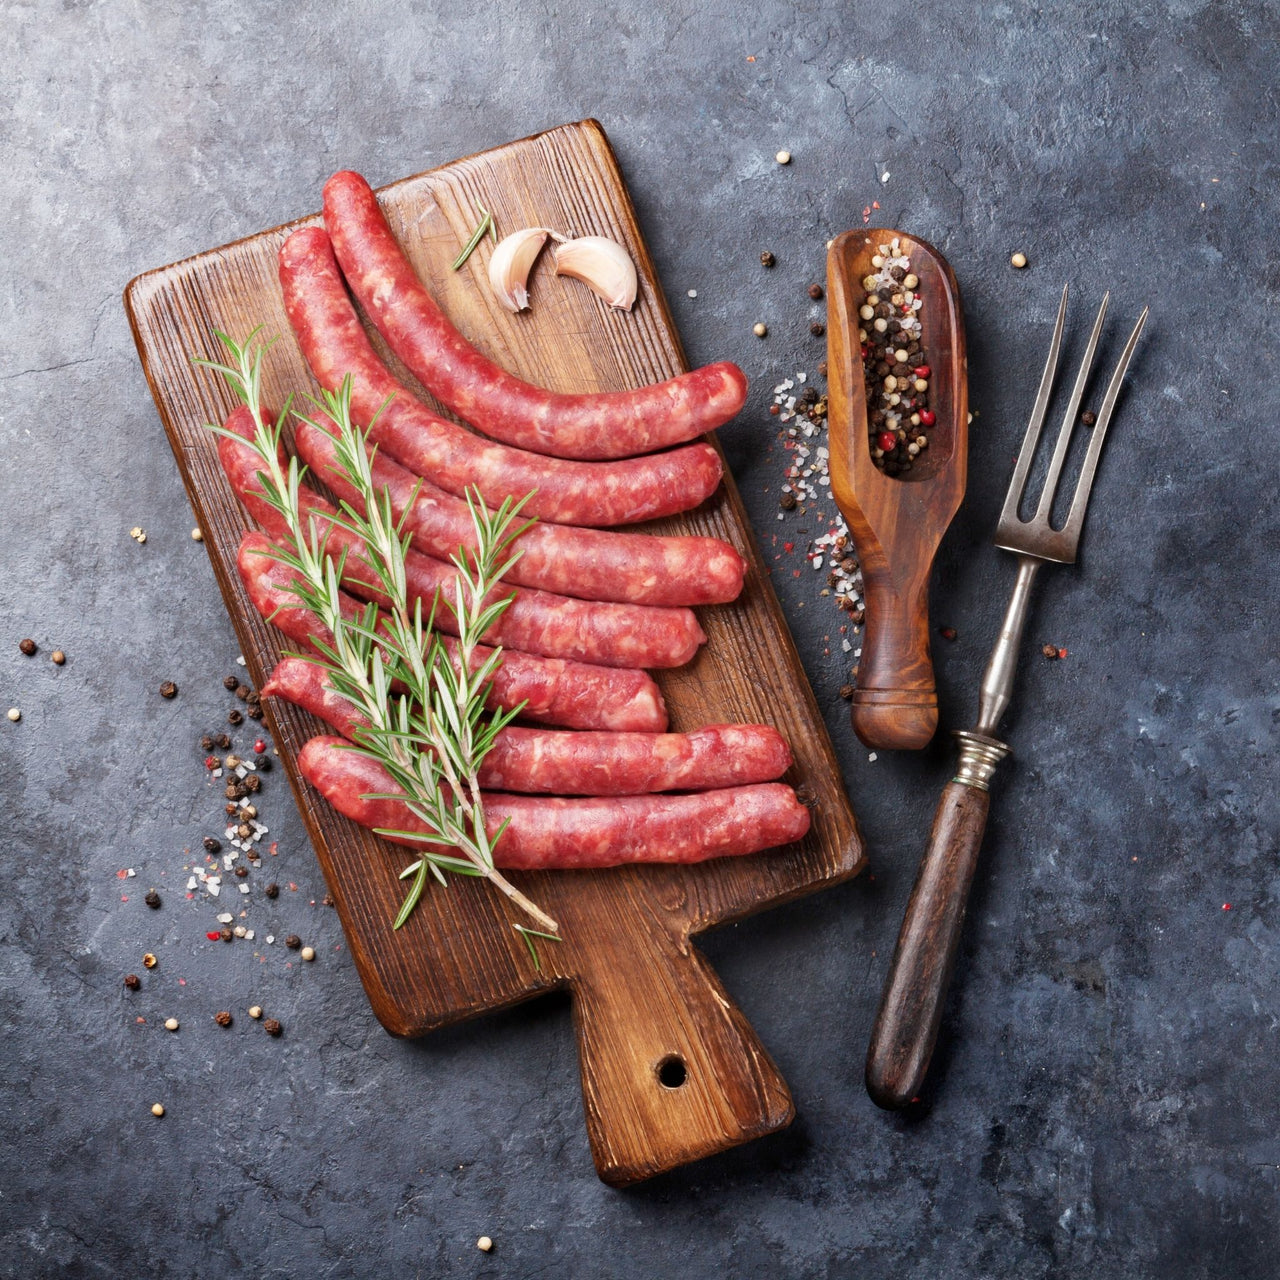 Image of F2F Certified Organic Nitrate Free Grass Fed Beef Sausages